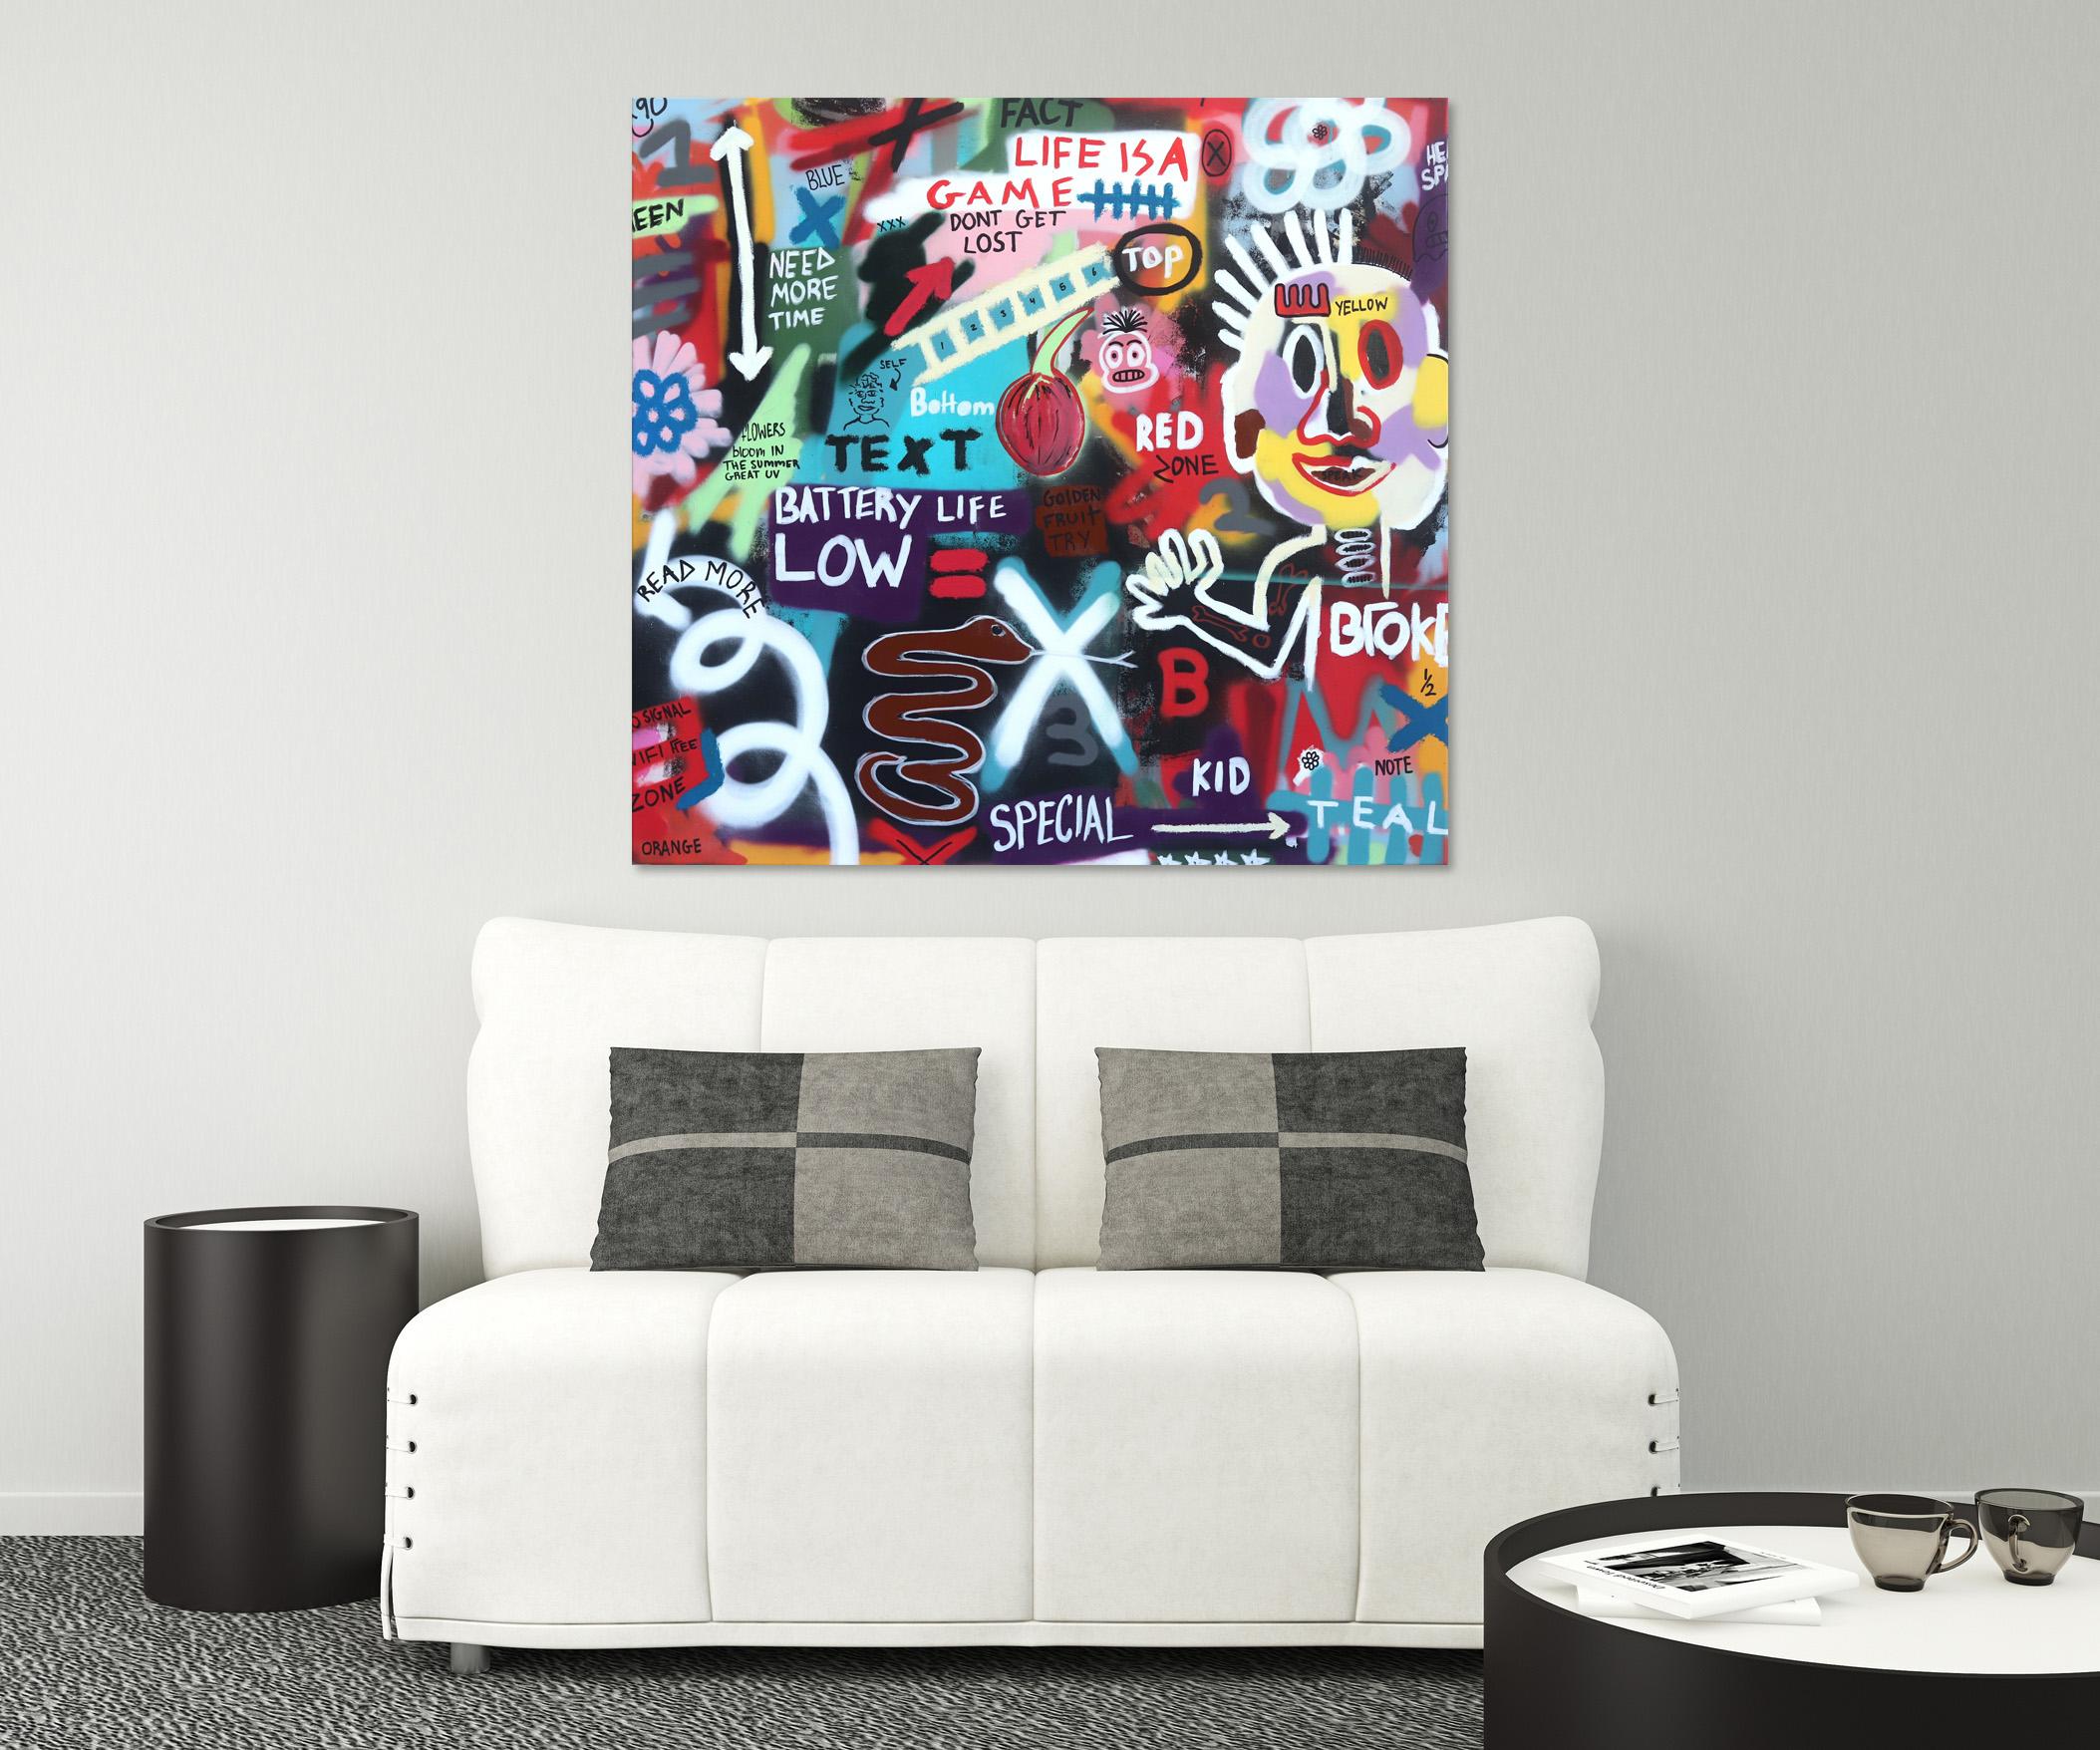 Life Is A Game - Large Colorful Contemporary Street Art Painting Figures Text For Sale 1